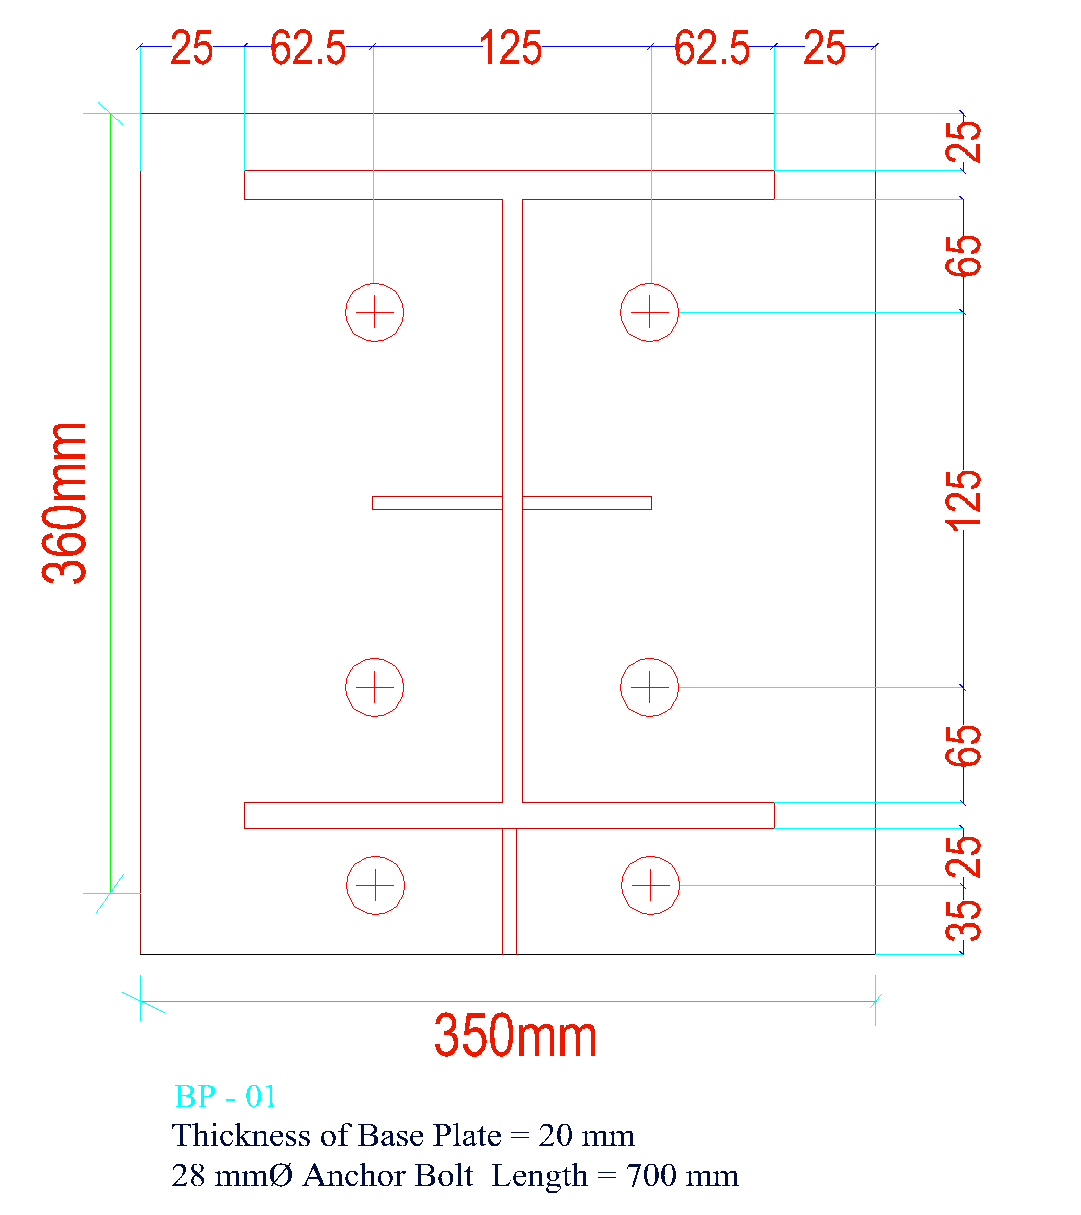 Base plate layout plan and details